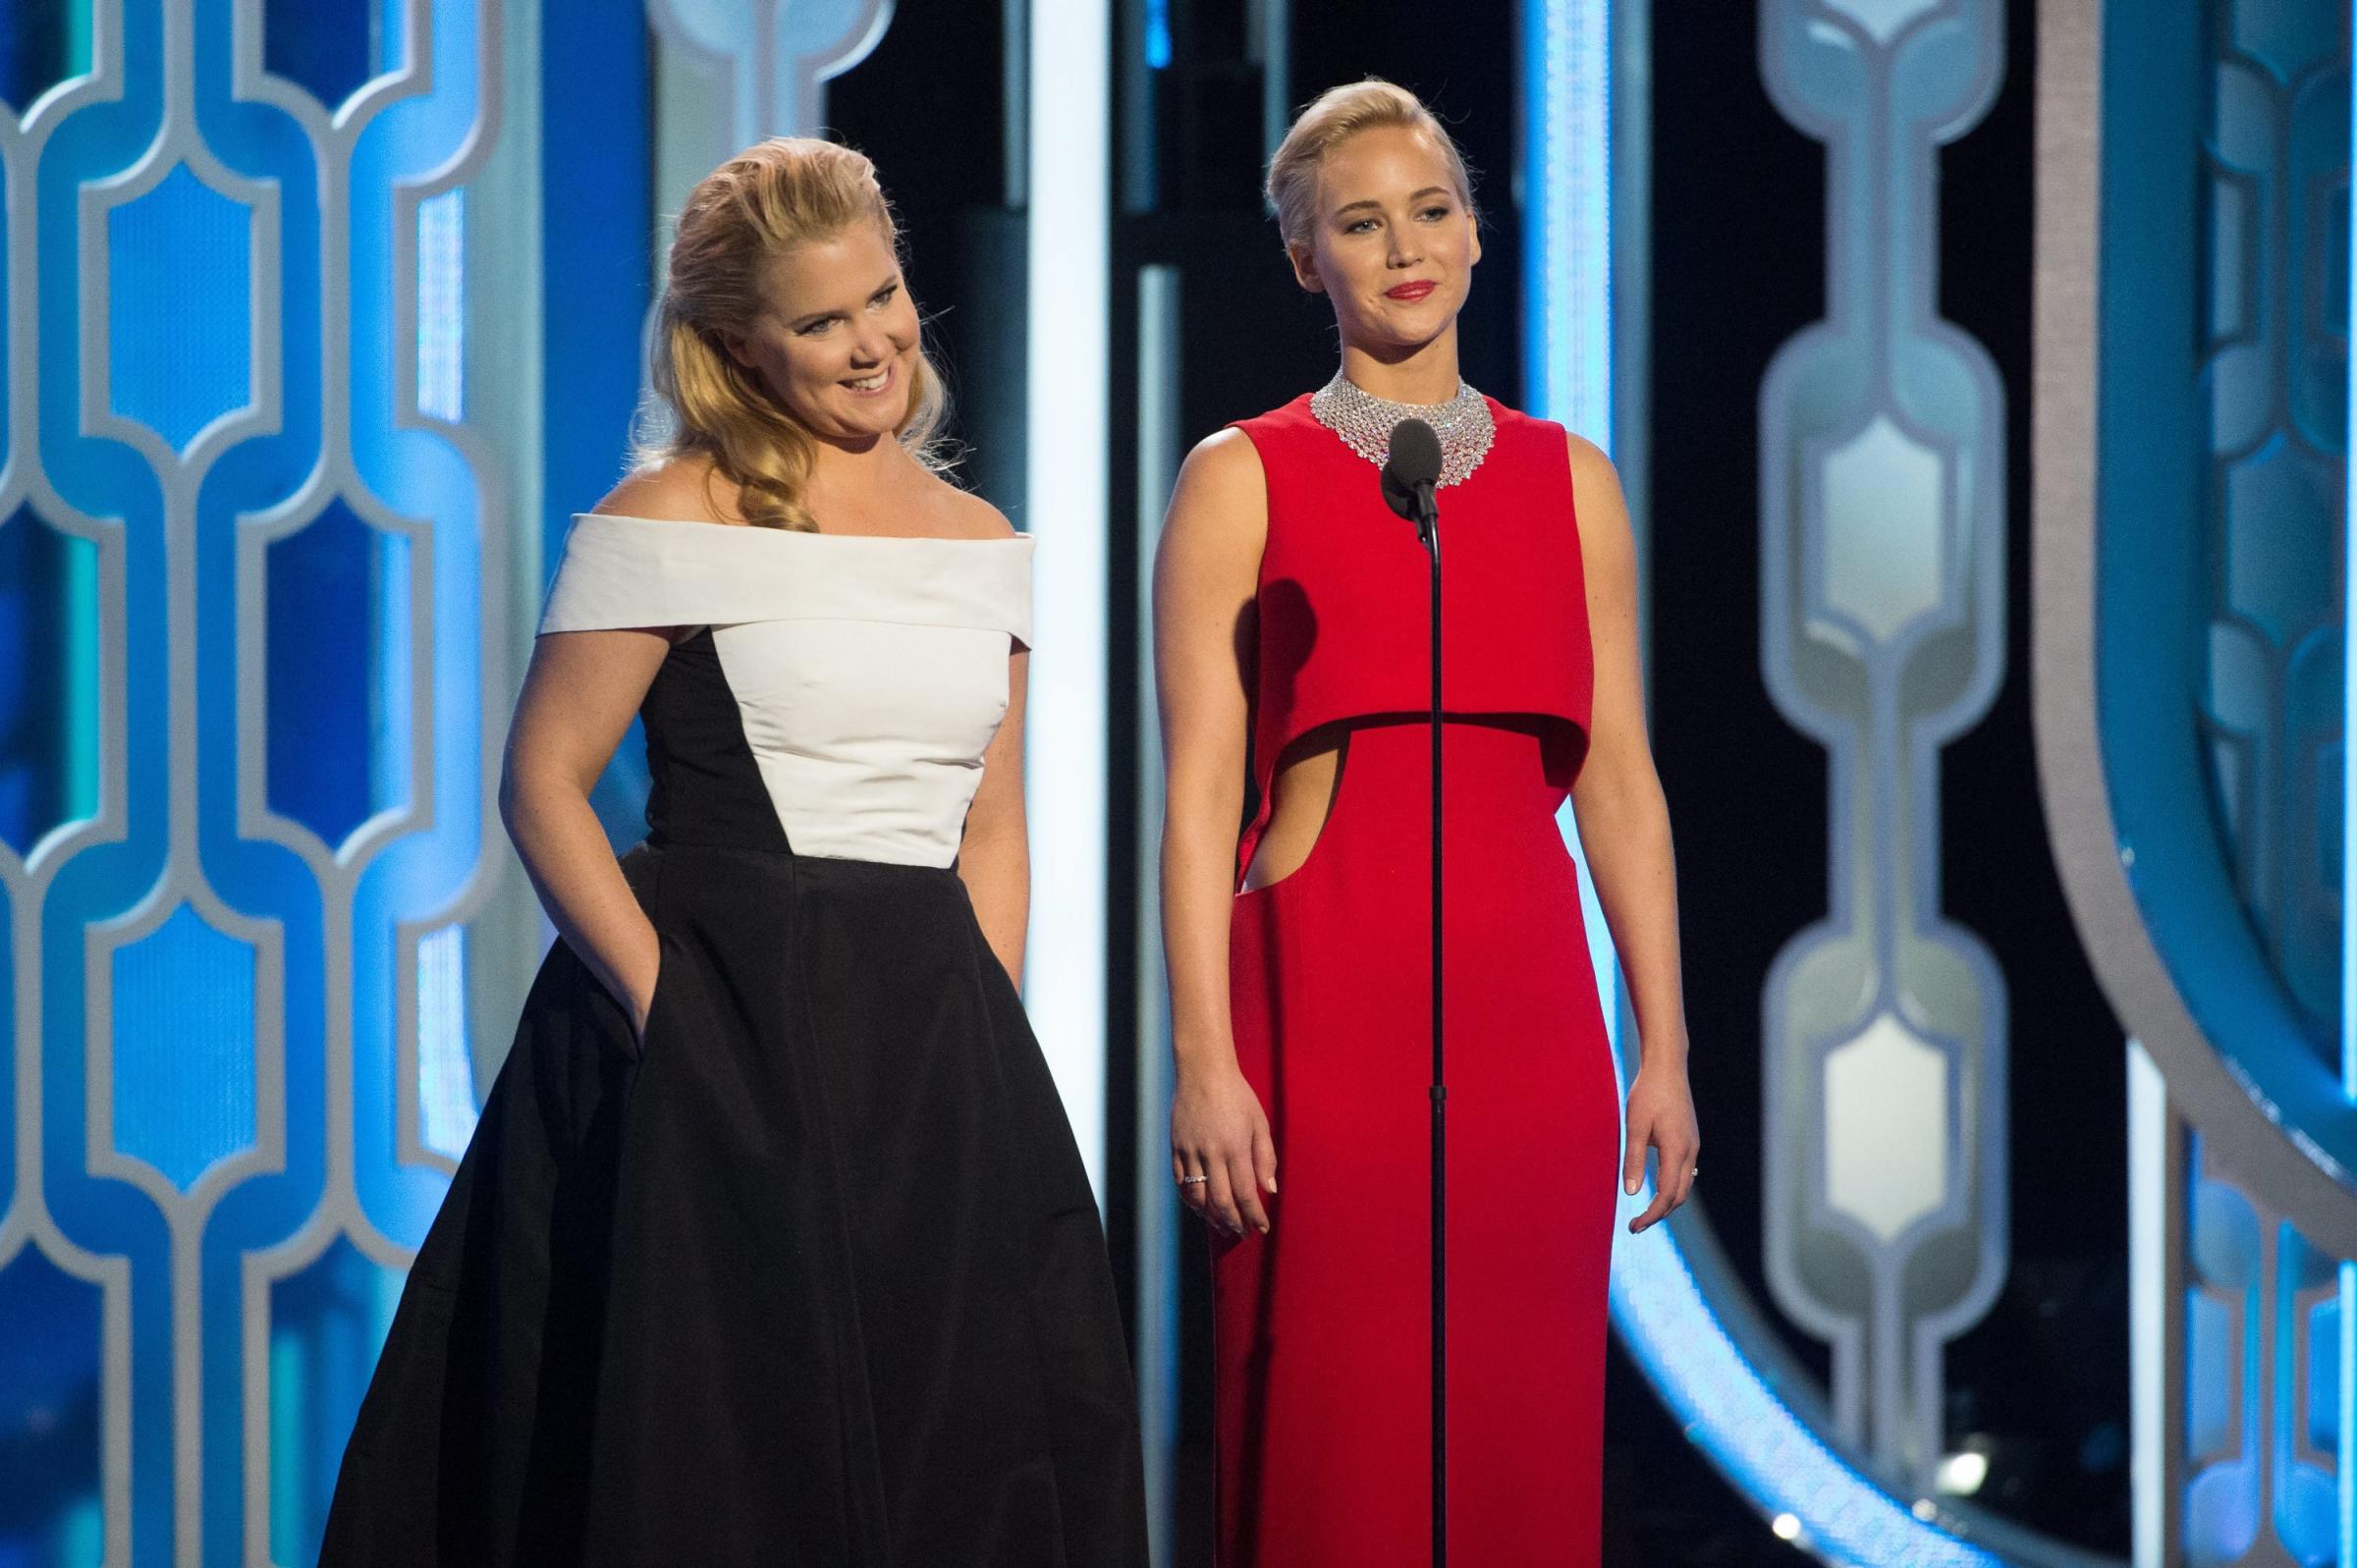 Amy Schumer and Jennifer Lawrence onstage at the 73rd Annual Golden Globe Awards at the Beverly Hilton in Beverly Hills in Beverly Hills, Calif. on Jan. 10, 2016.